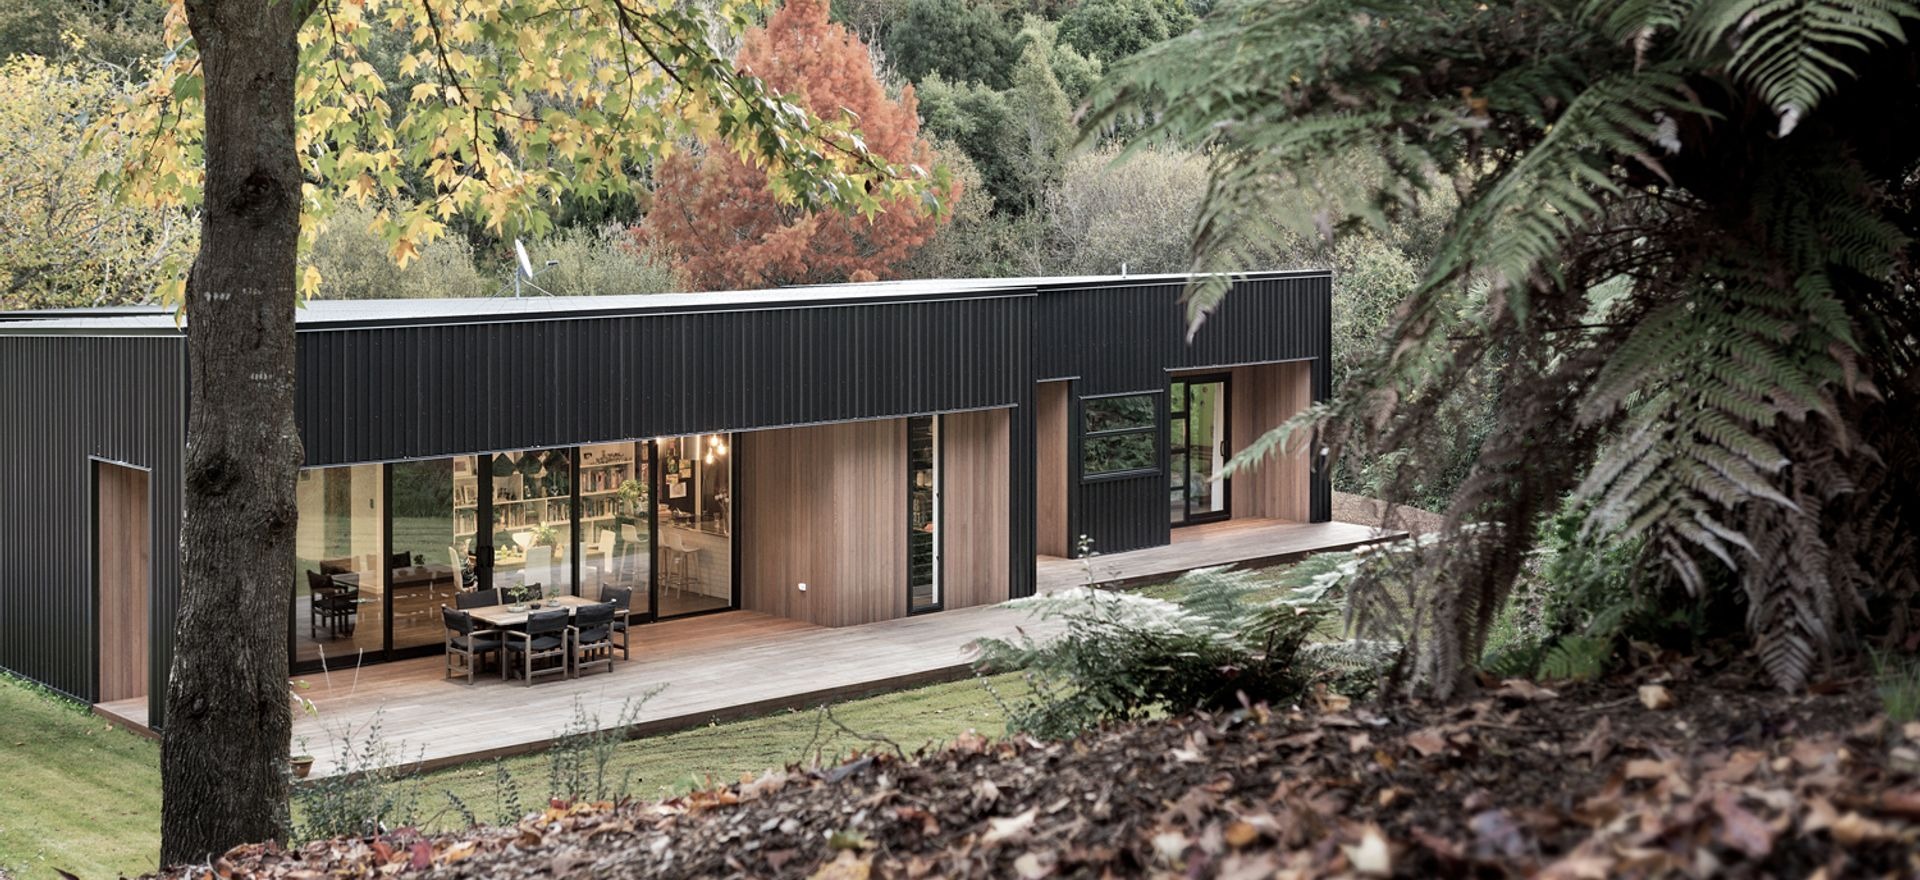 The pros and cons of metal cladding for New Zealand homes